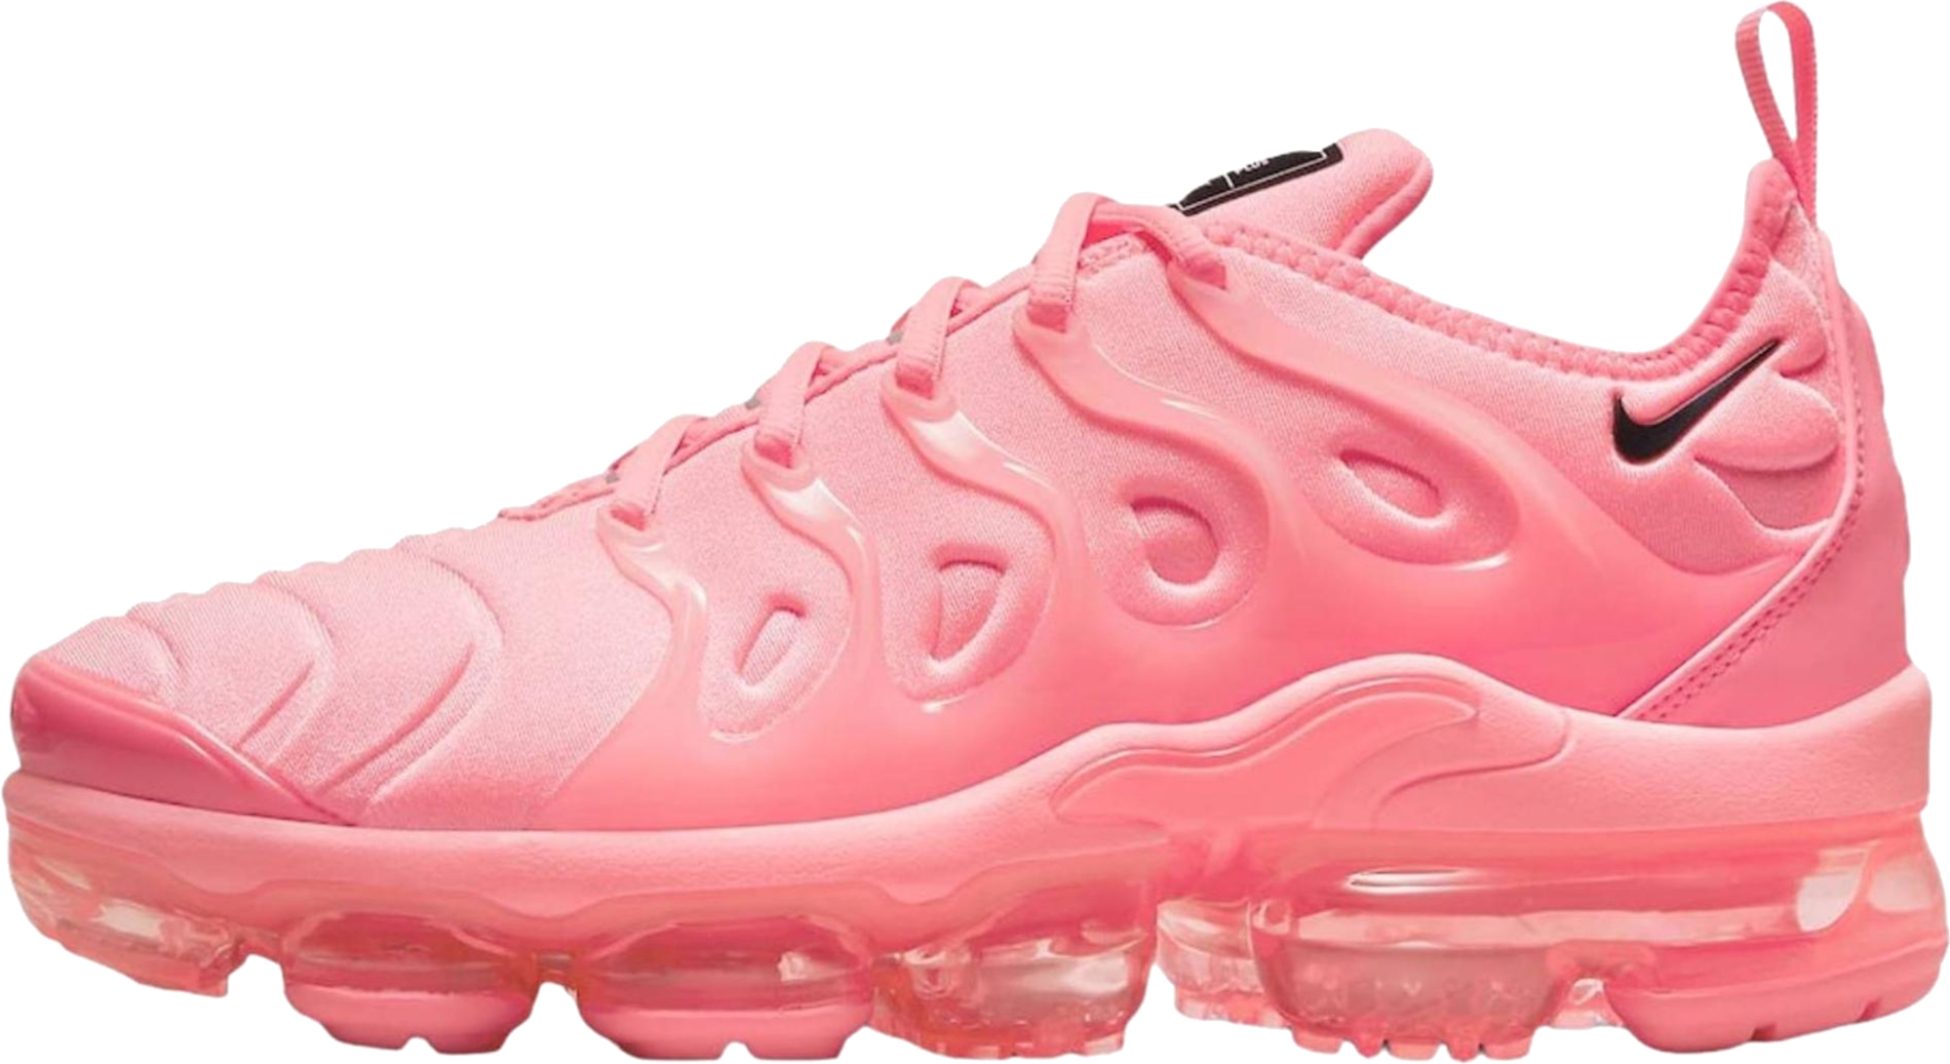 vapormax plus red and pink